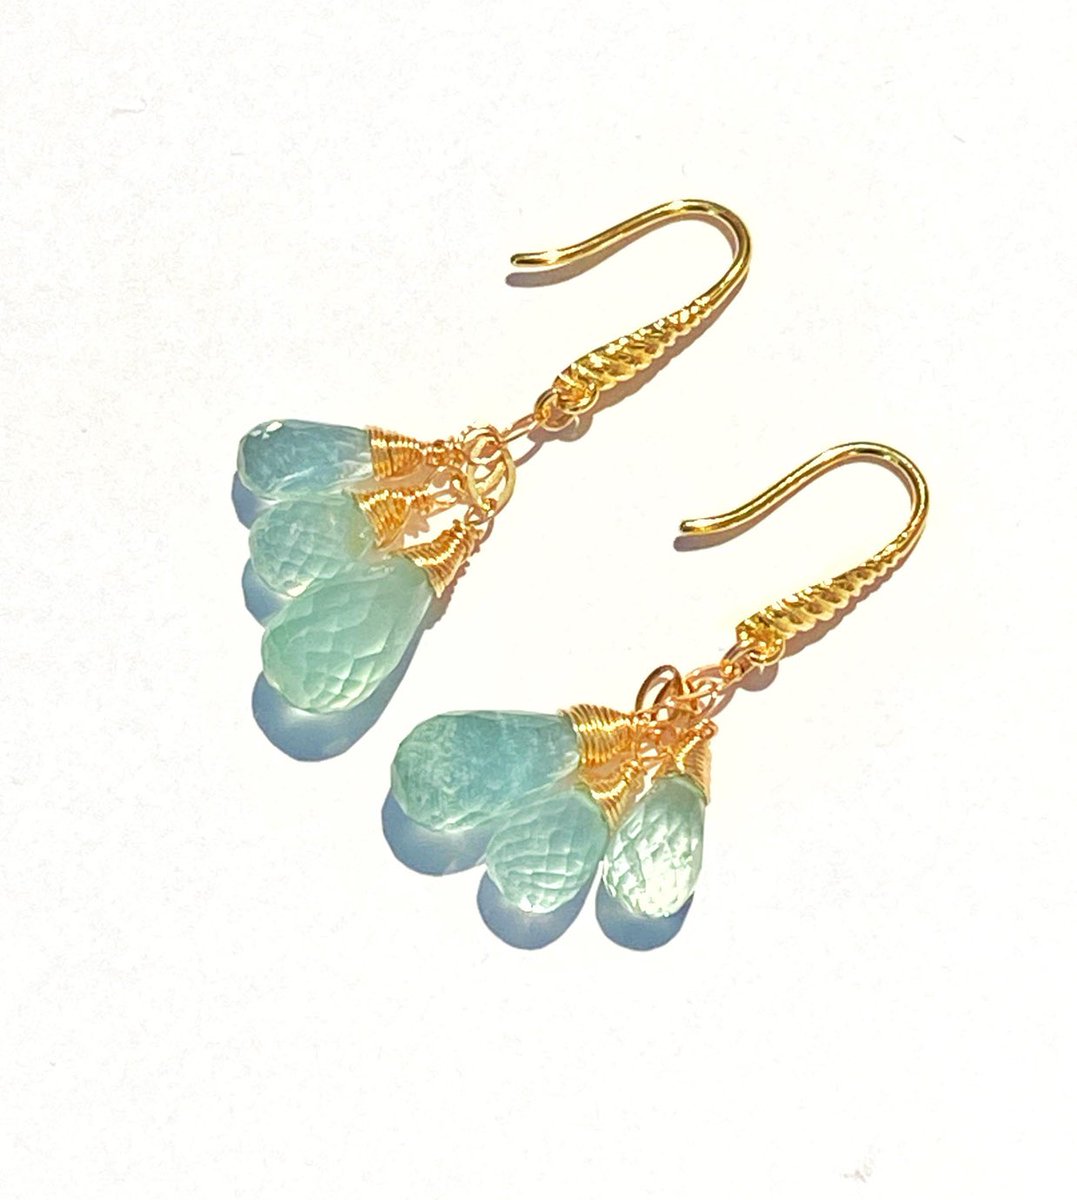 Excited to share the latest addition to my #etsy shop: Aquamarine Earring Mom Gift Statement Earrings Boho Earring Dangle Earring Gift for Her Gold Fill Wire Wrapped Lever Back Teardrop Briolette etsy.me/3bAZKm0
#aquamarineearrings #marchbirthdaygift #giftsforwomen